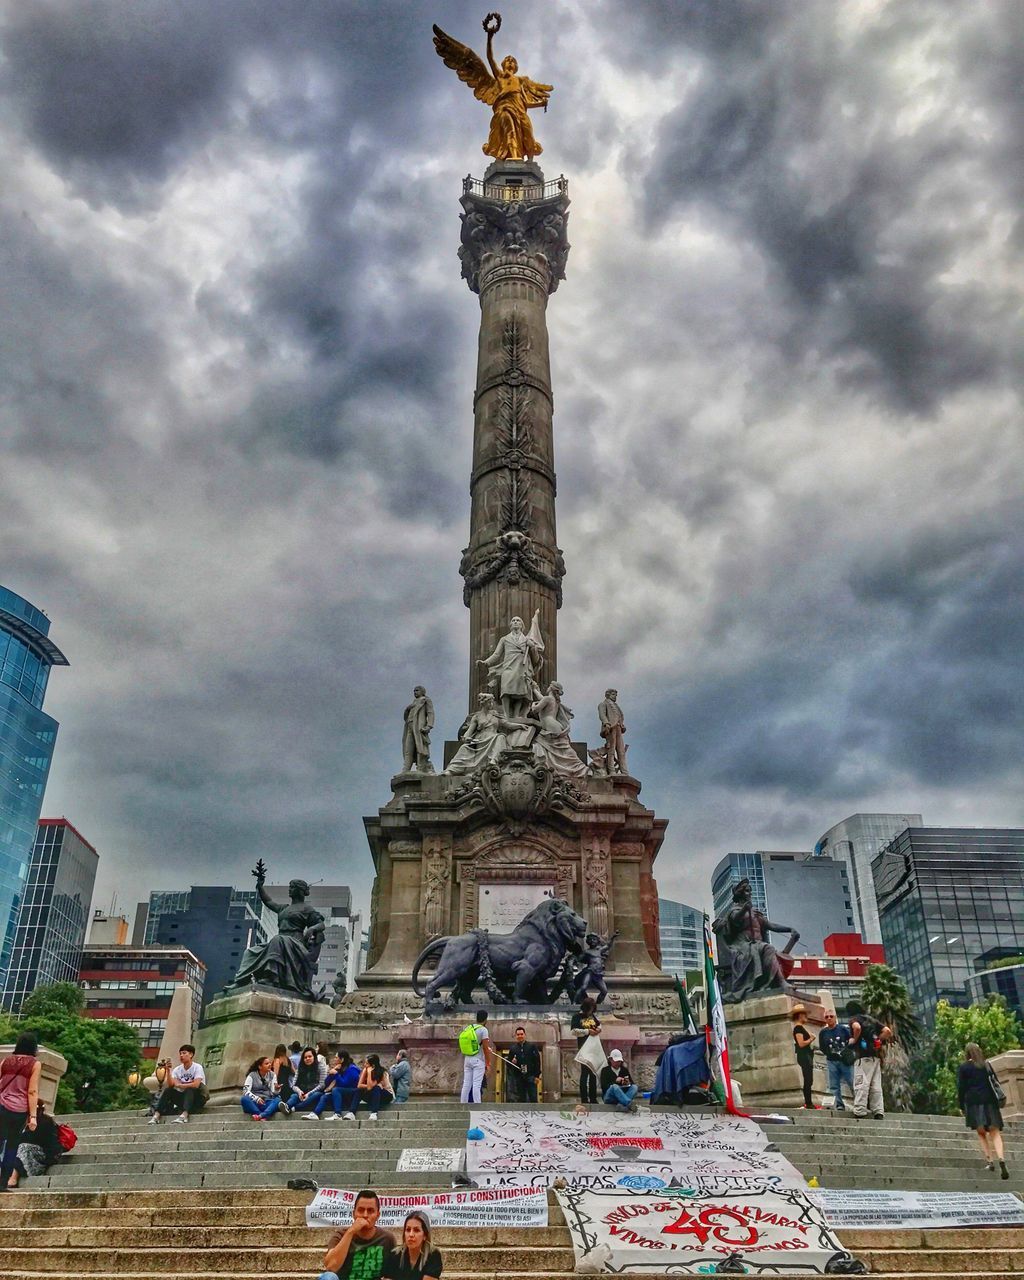 VIEW OF STATUE IN CITY